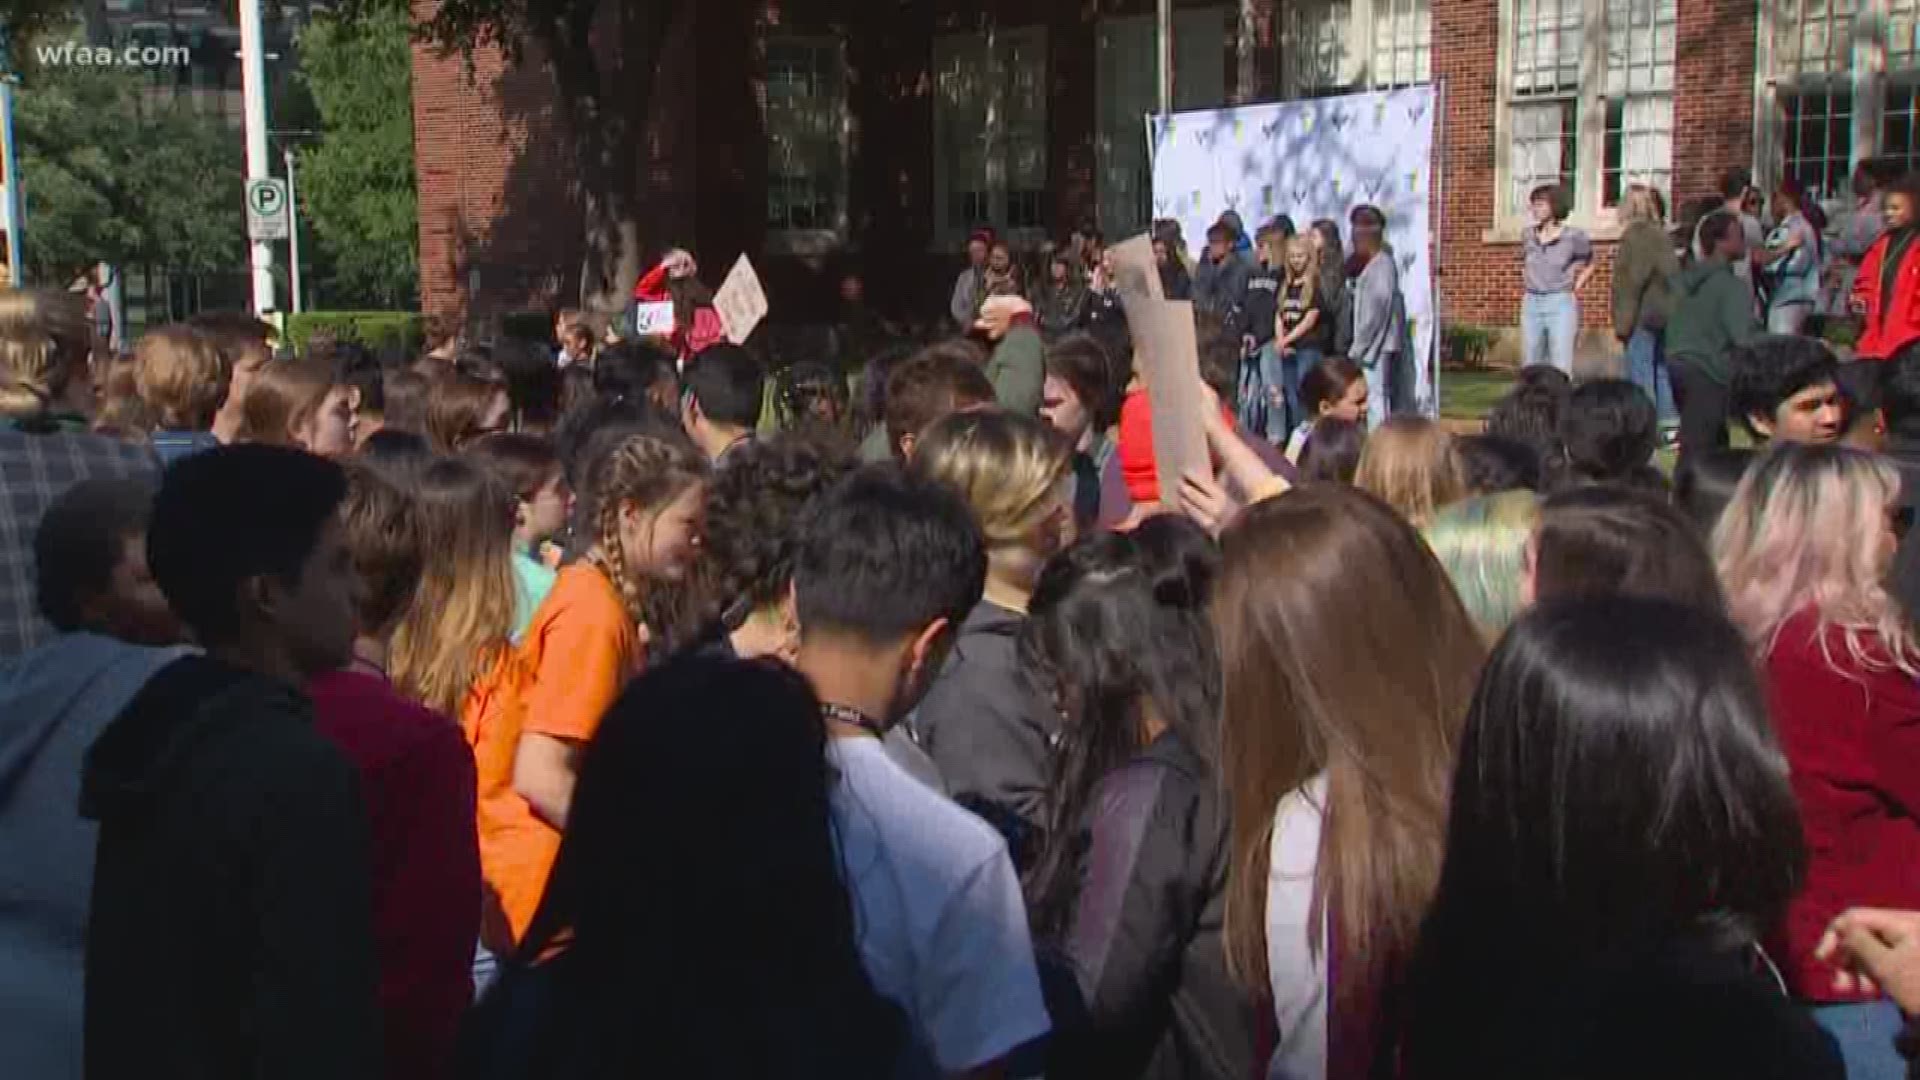 Local students walk out on Columbine anniversary